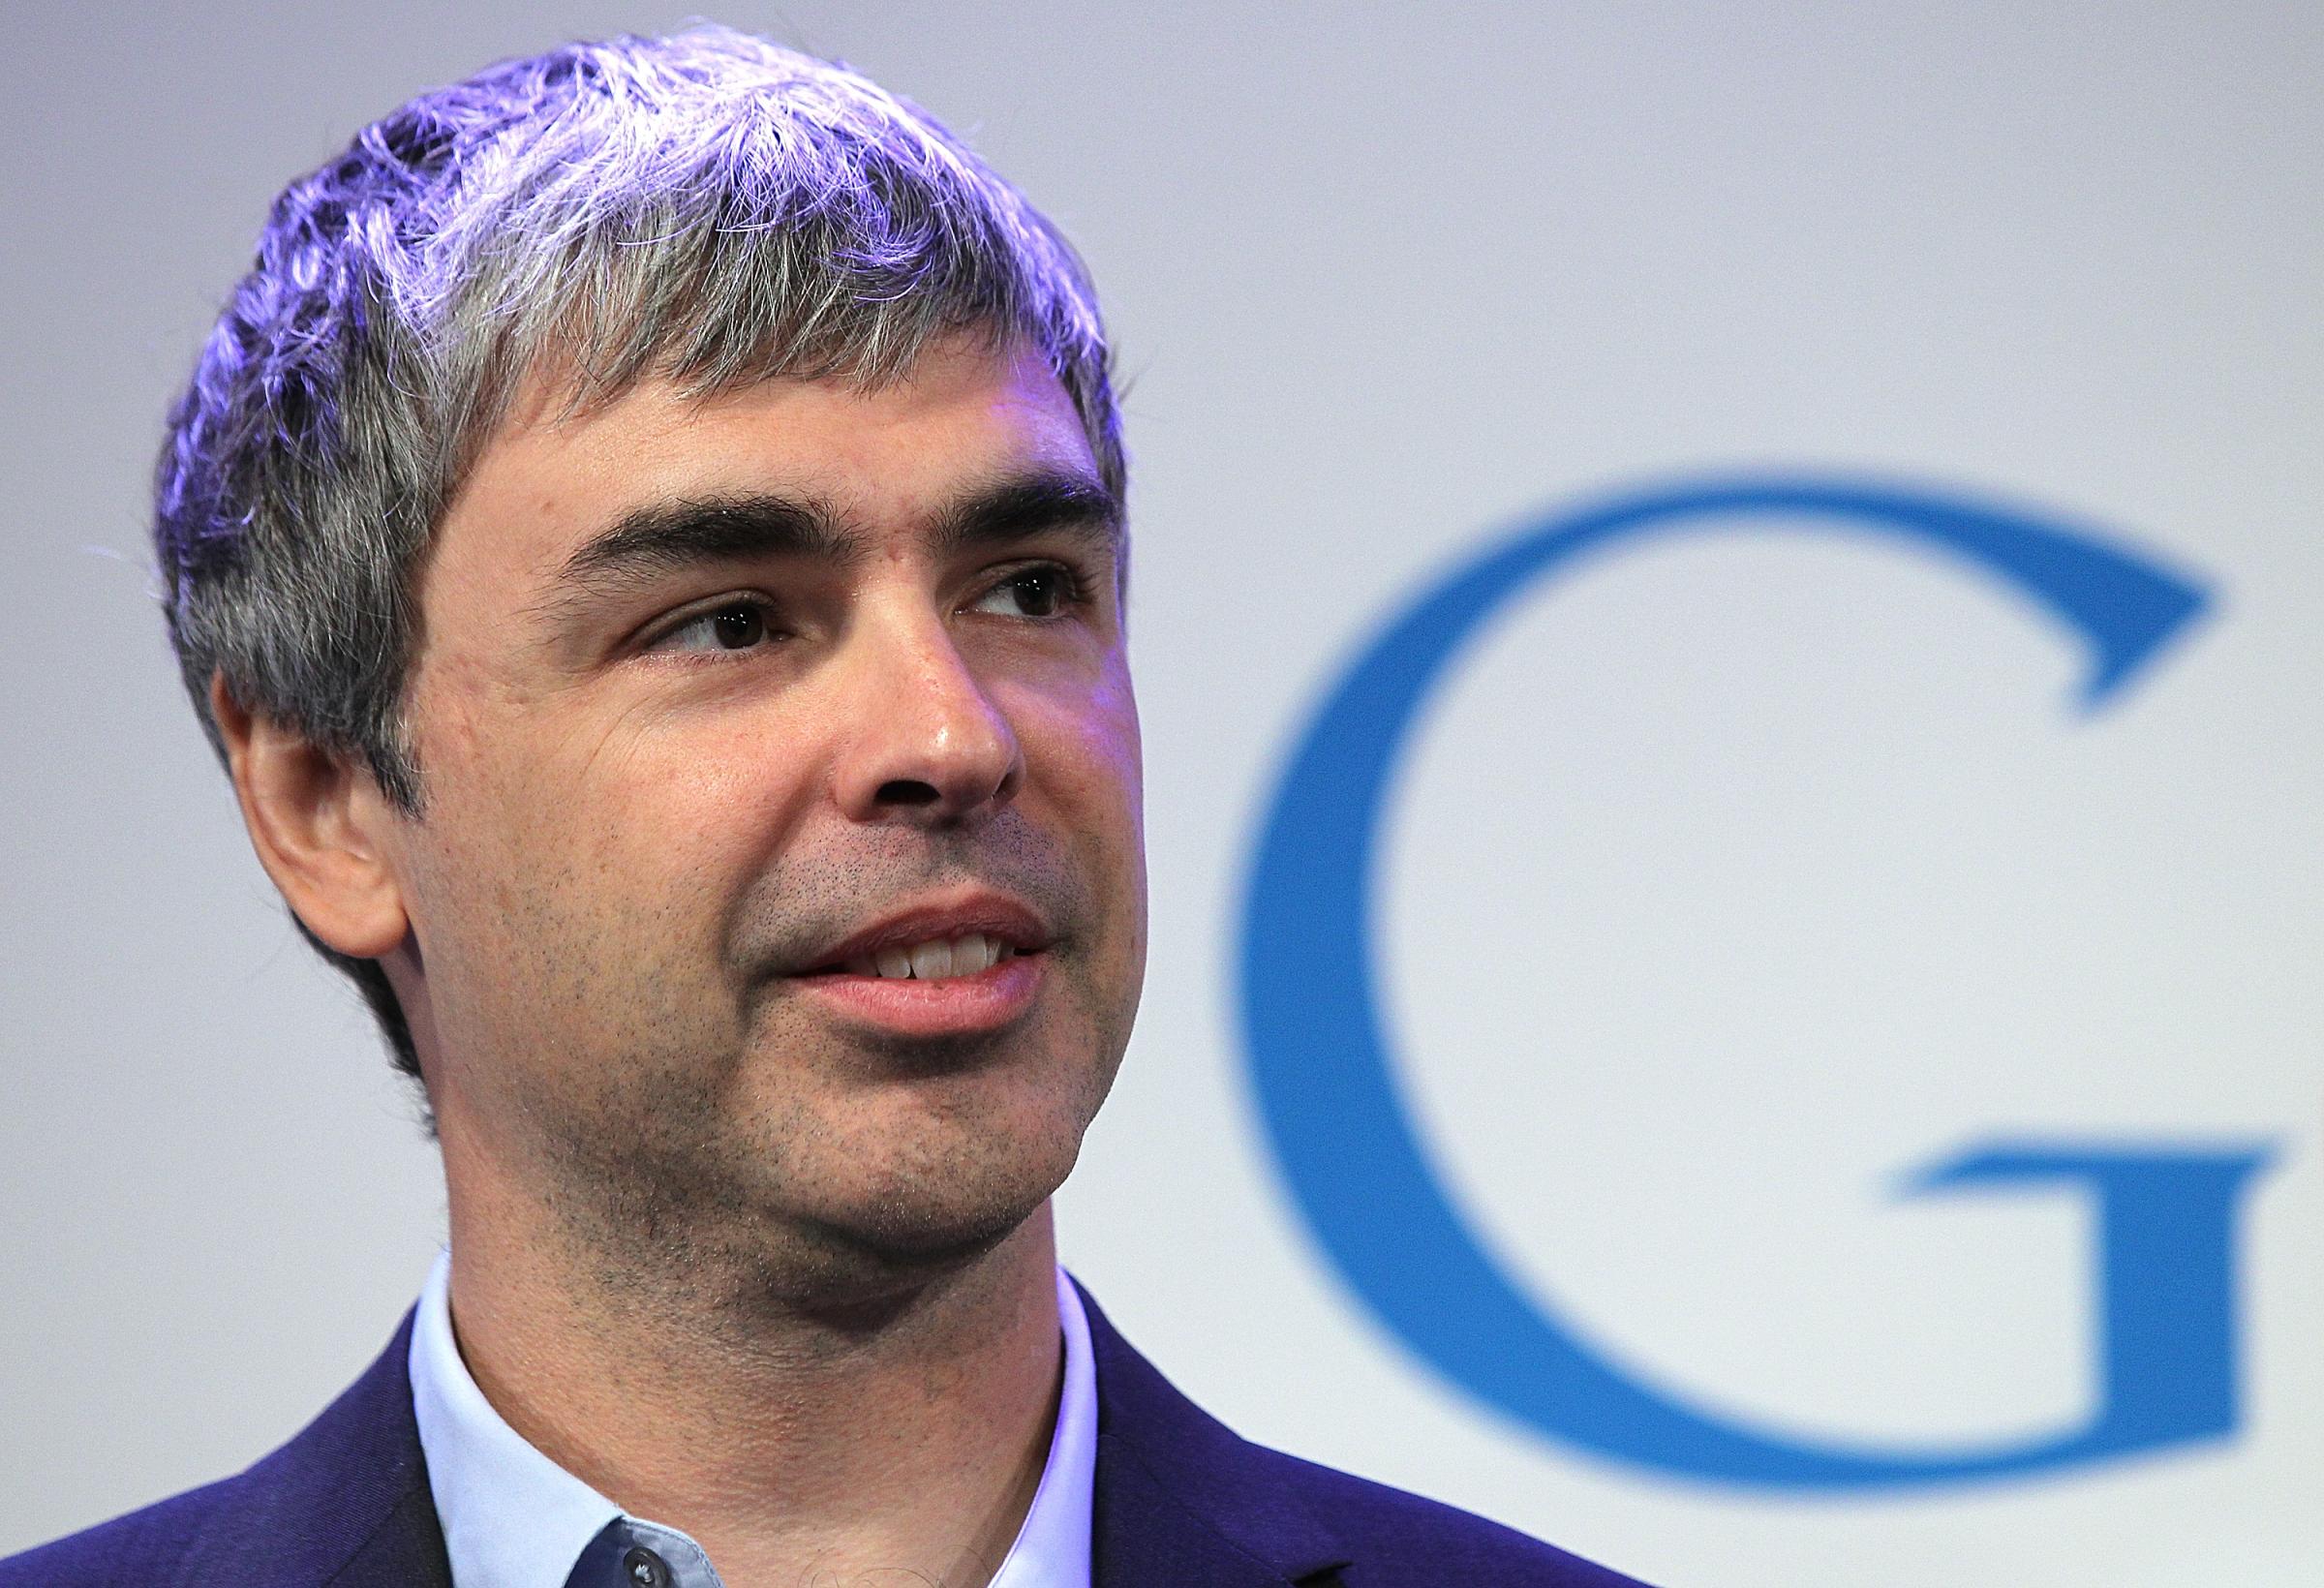 Larry Page at a news conference at the Google offices in New York City on May 21, 2012.